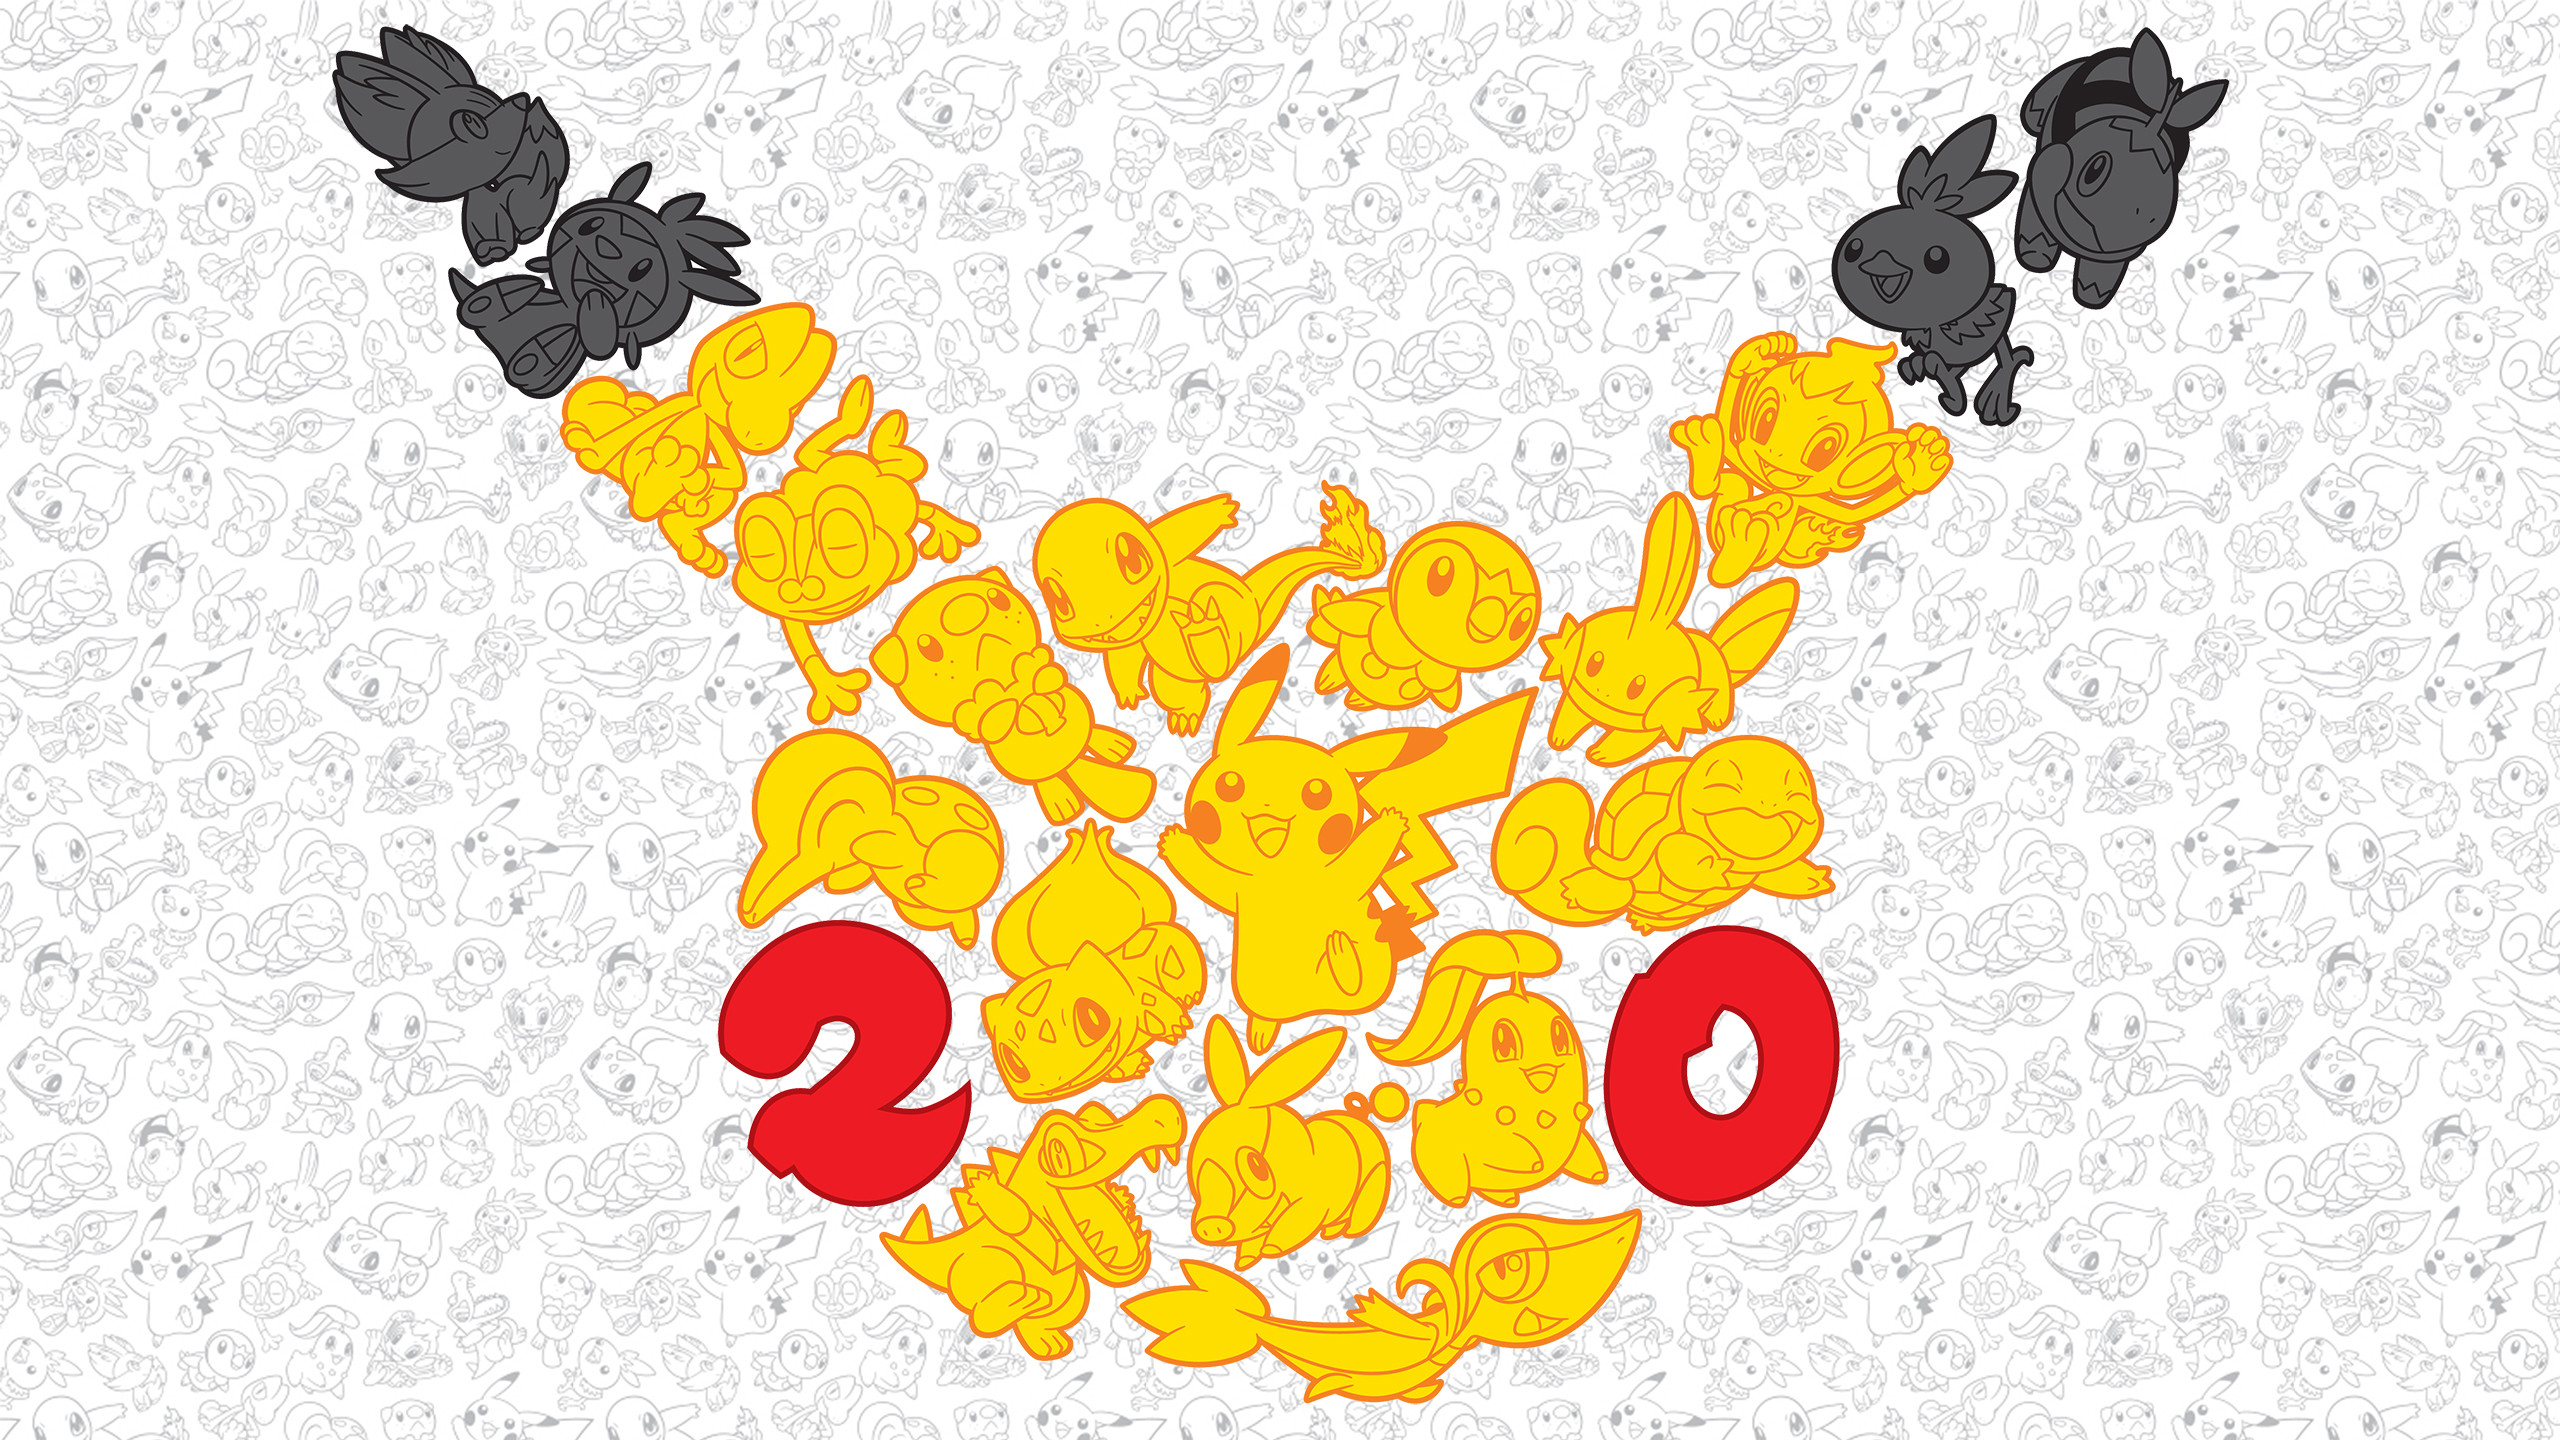 2560x1440 I made a High Res Version of the PokÃ©mon 20 Artwork ...